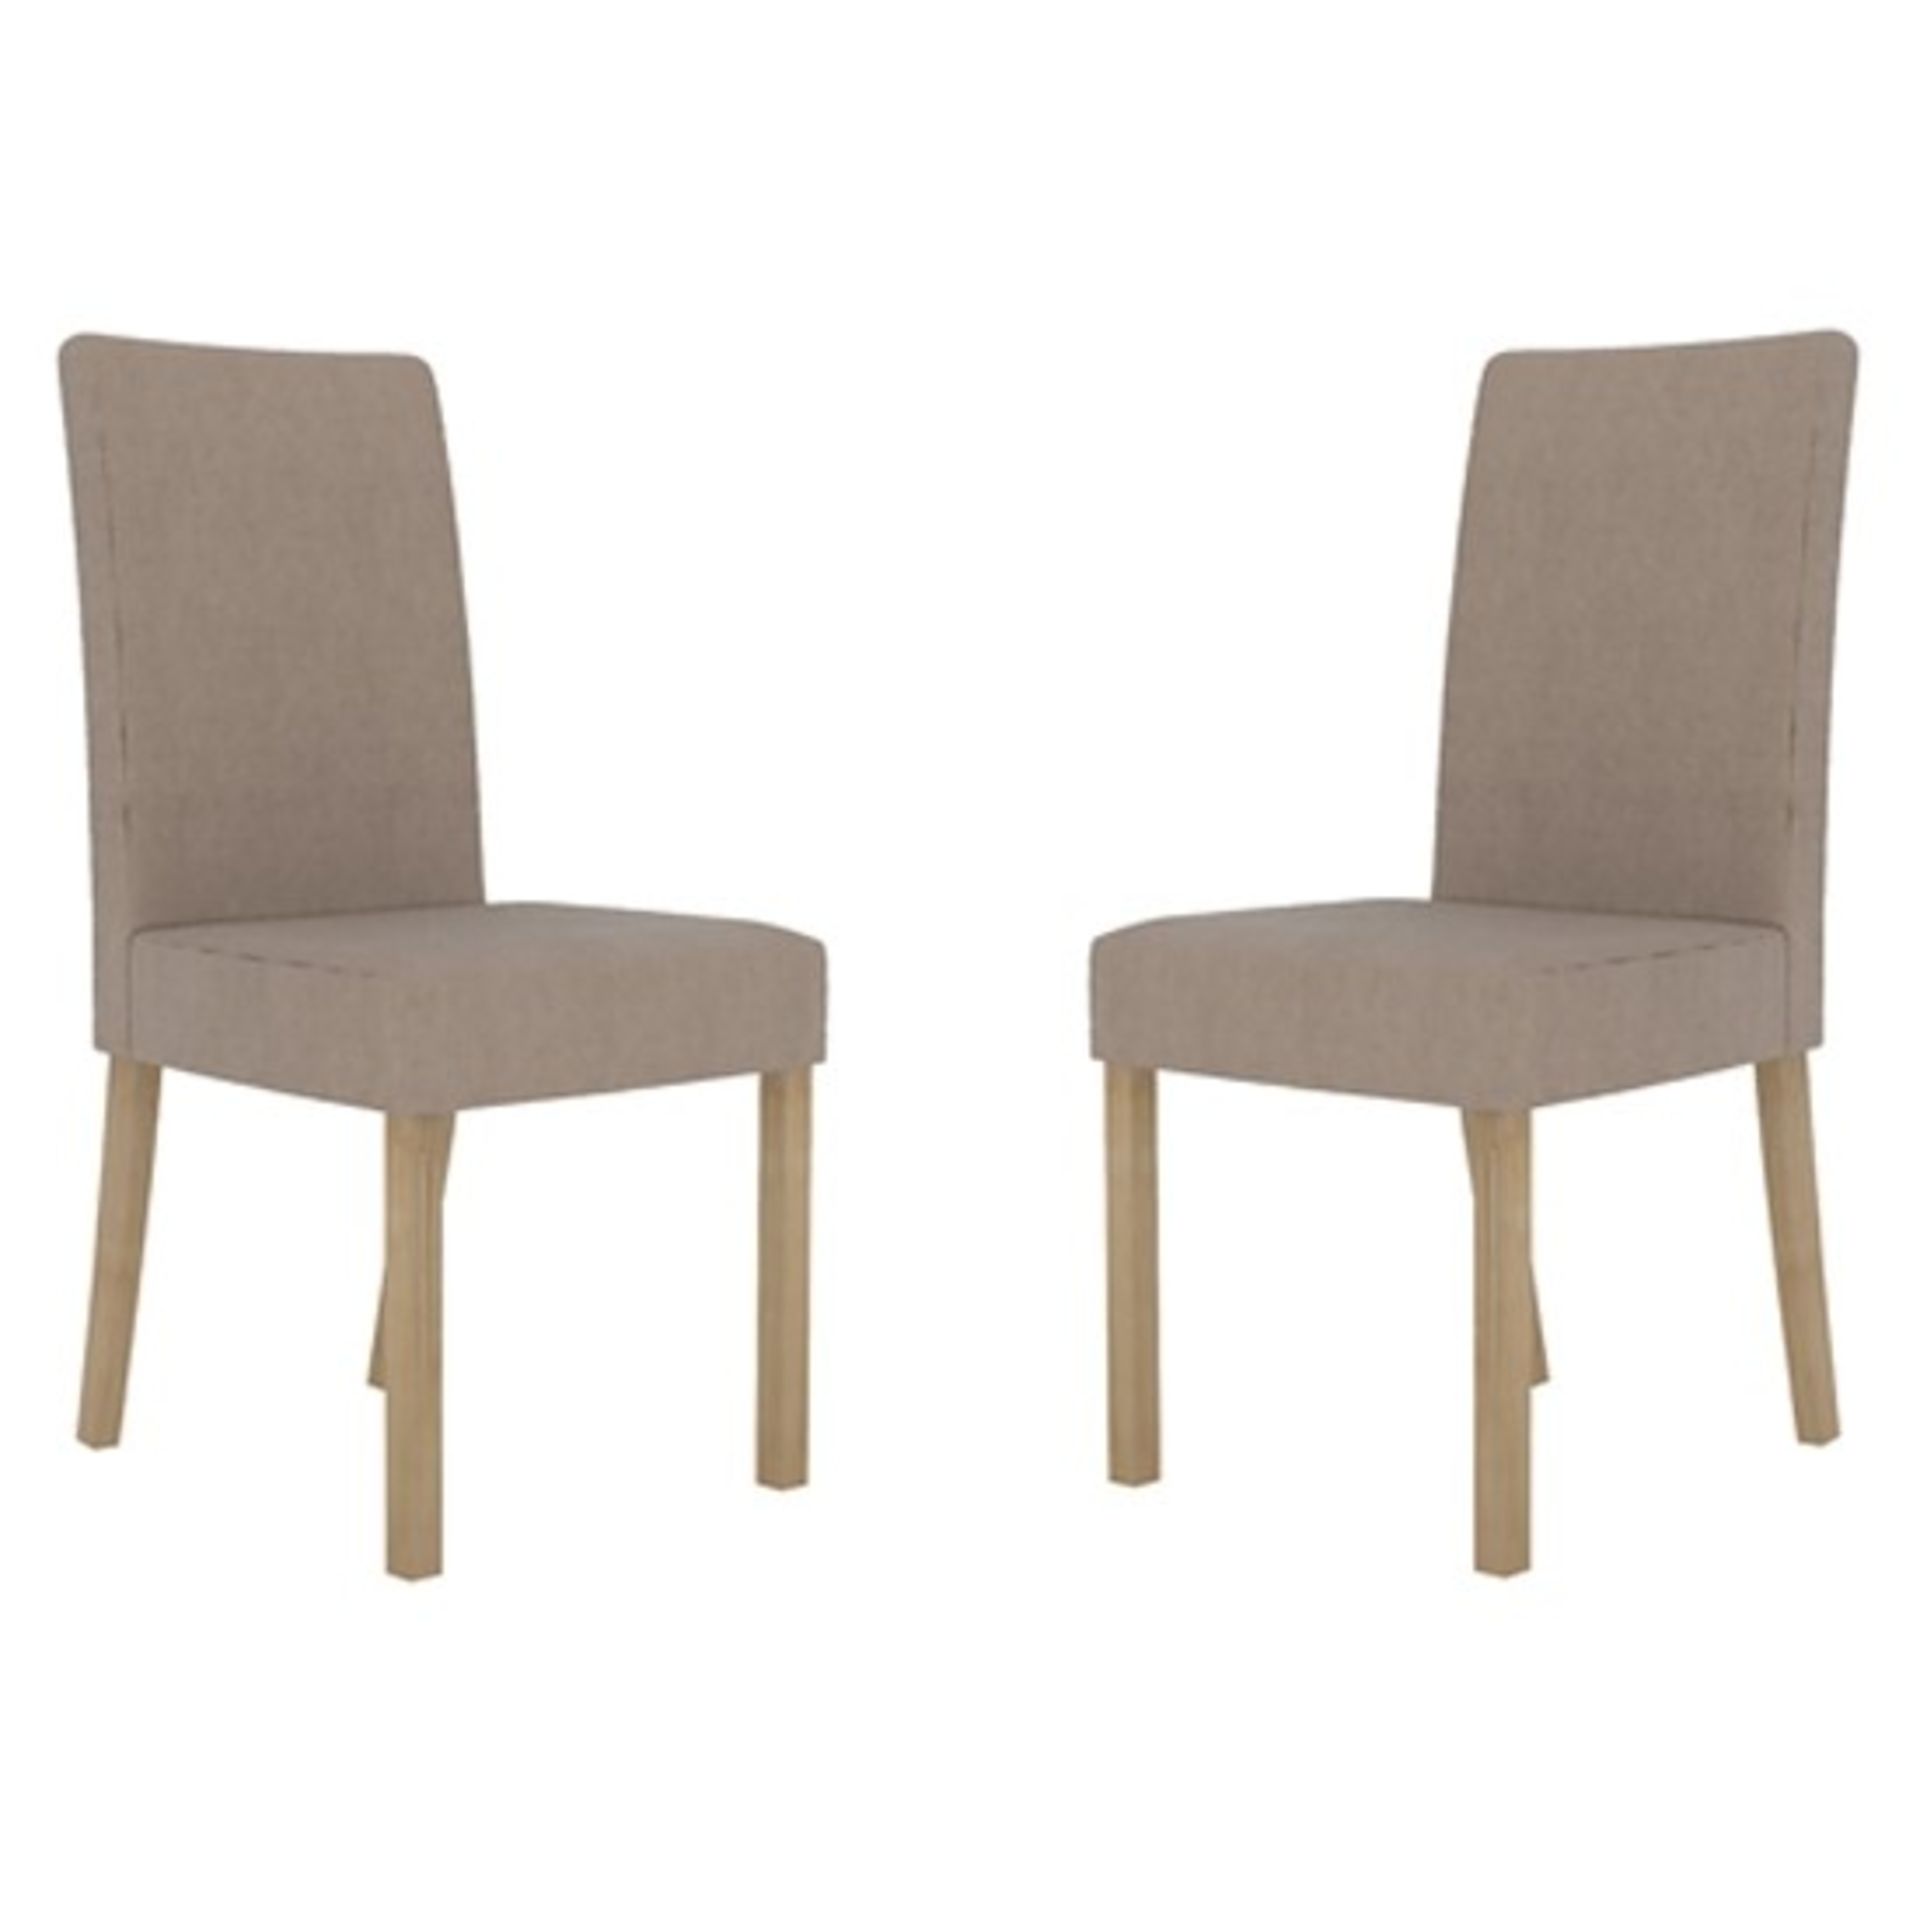 NEW BOXED Set of Four Melodie Beige Linen Fabric Dining Chairs. RRP £299.95 per pair, total lot